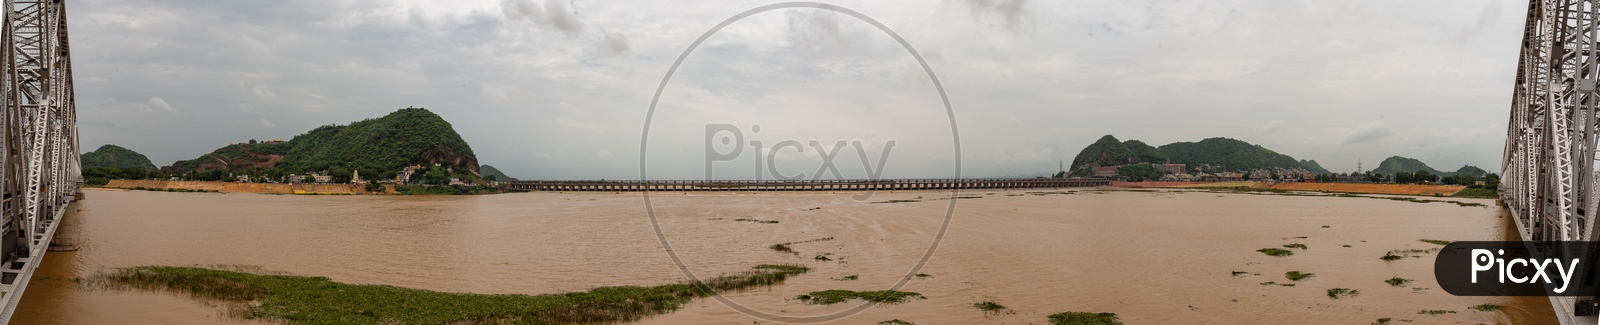 RZiver Krishna Water gushing out of Prakasam Barrage as the gates have been lifted off to release water into the sea